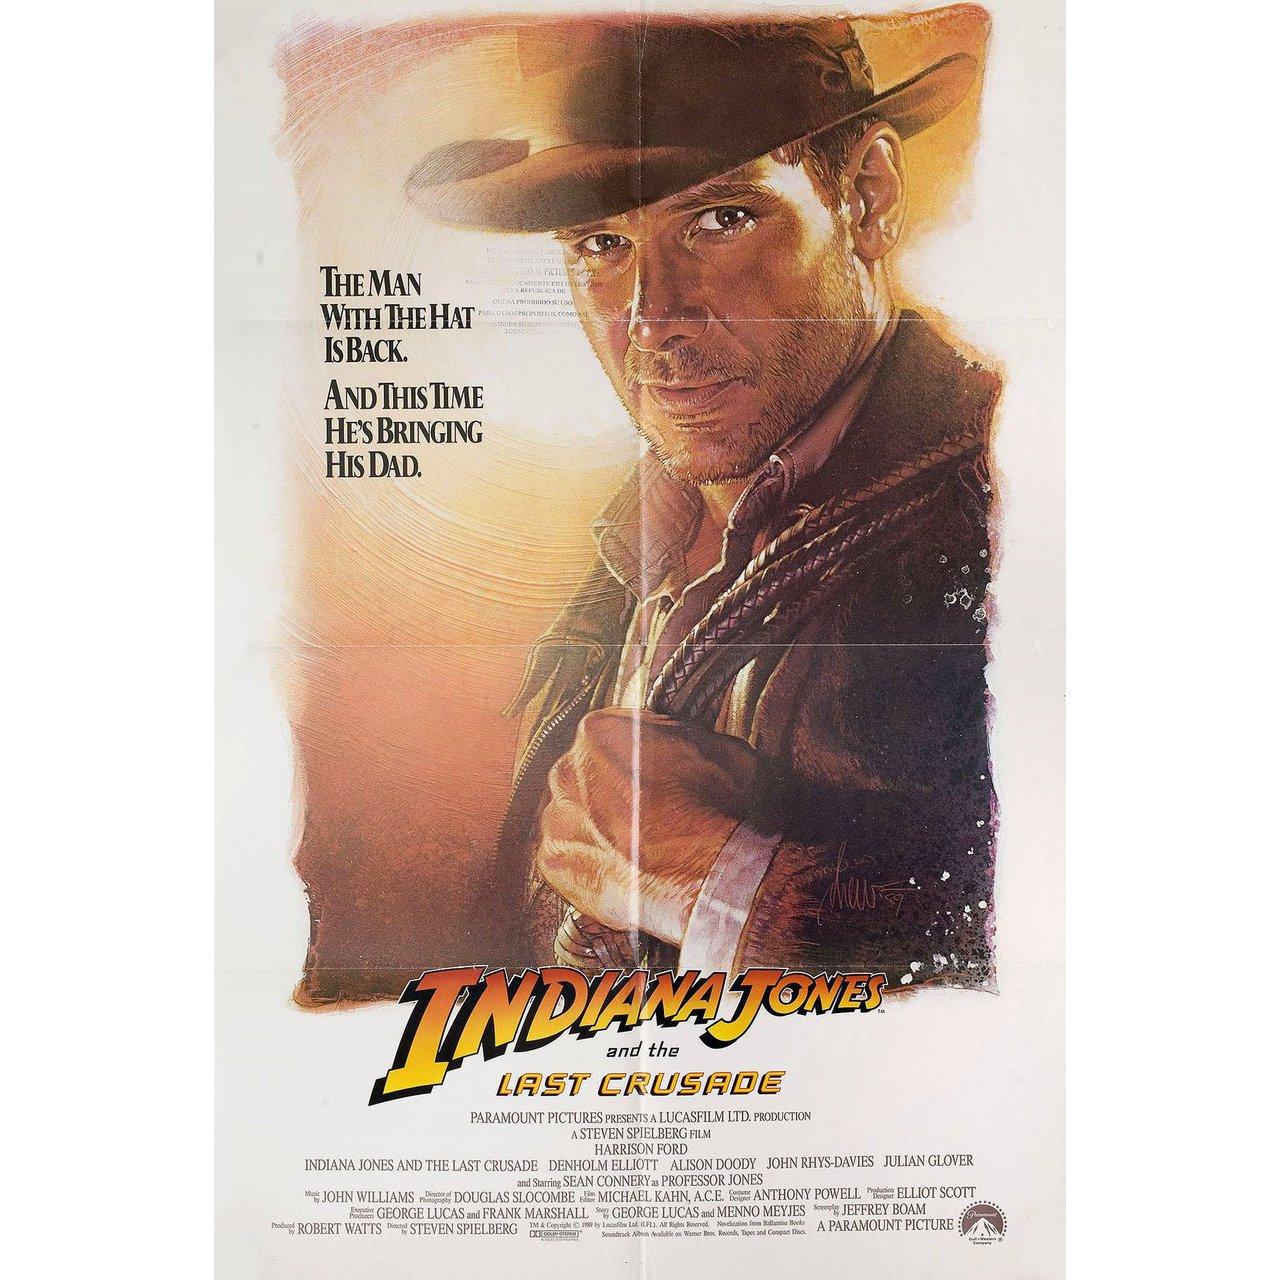 Original 1989 U.S. one sheet poster by Drew Struzan for the film 'Indiana Jones and the Last Crusade' directed by Steven Spielberg with Harrison Ford / Sean Connery / Denholm Elliott / Alison Doody. Very good-fine condition, folded with stamp on